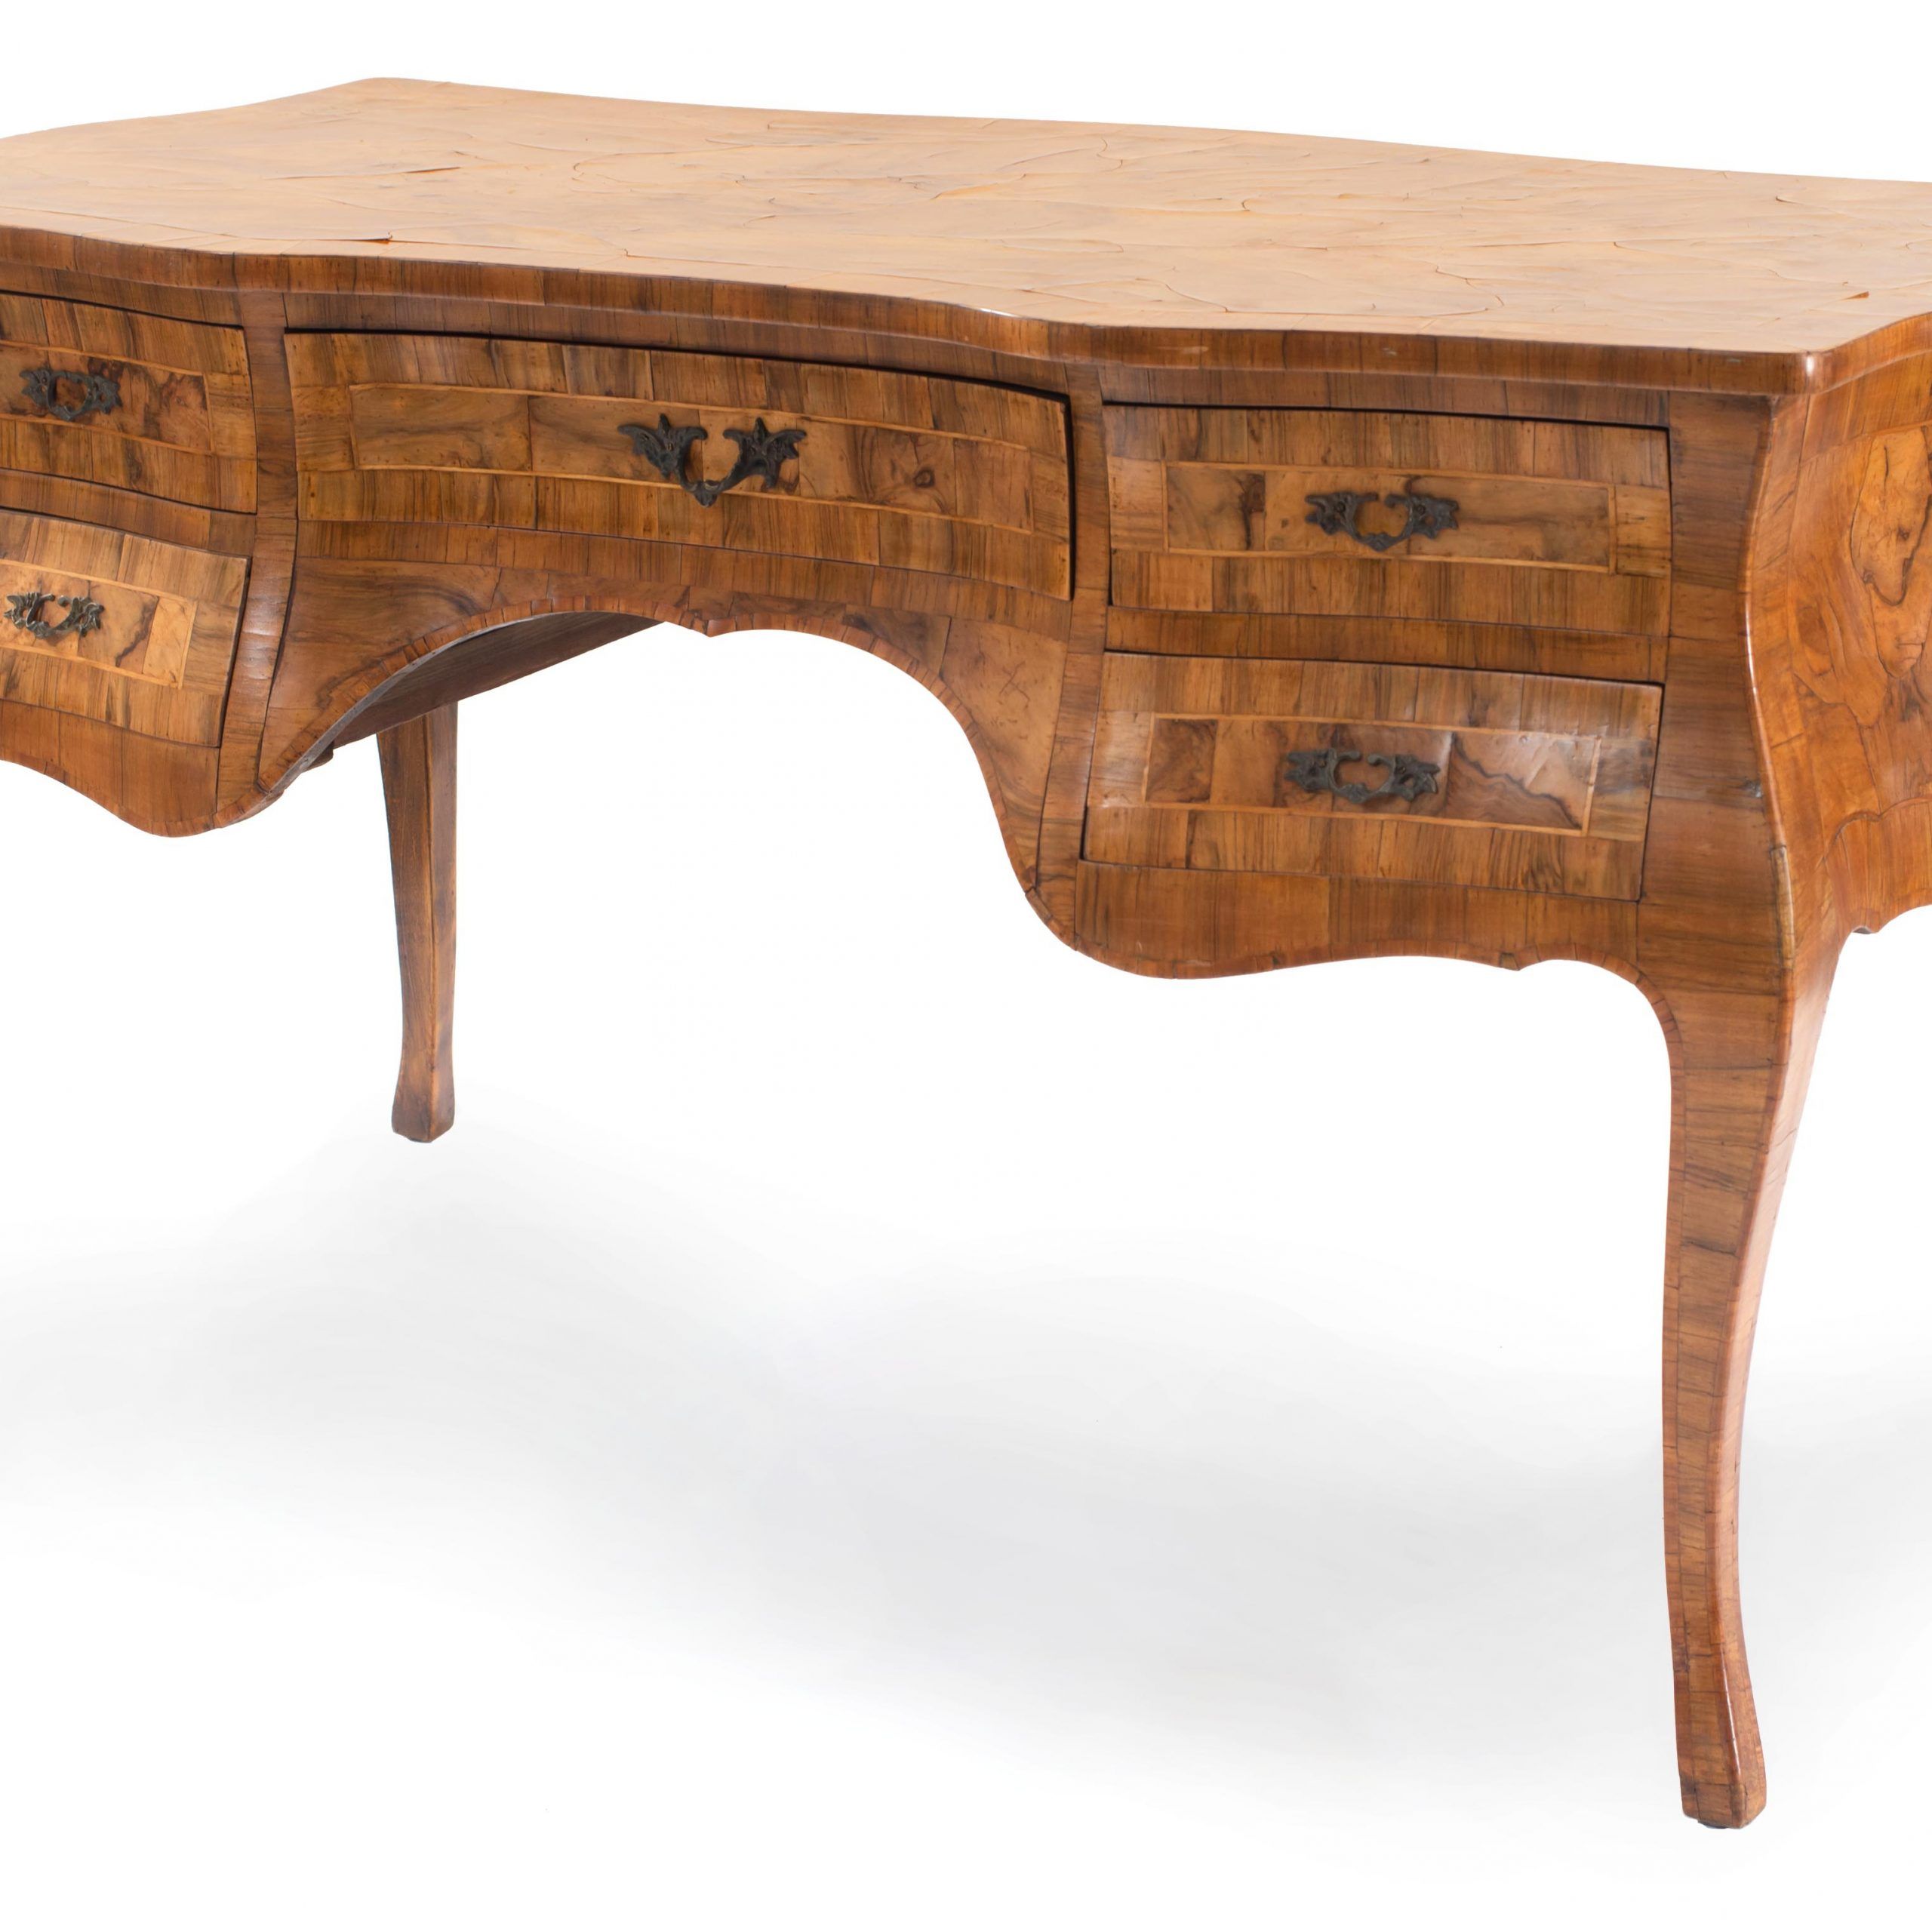 Italian Rococo Burl Walnut Writing Desk 1 Intended For Well Known Walnut And Black Writing Desks (View 4 of 15)